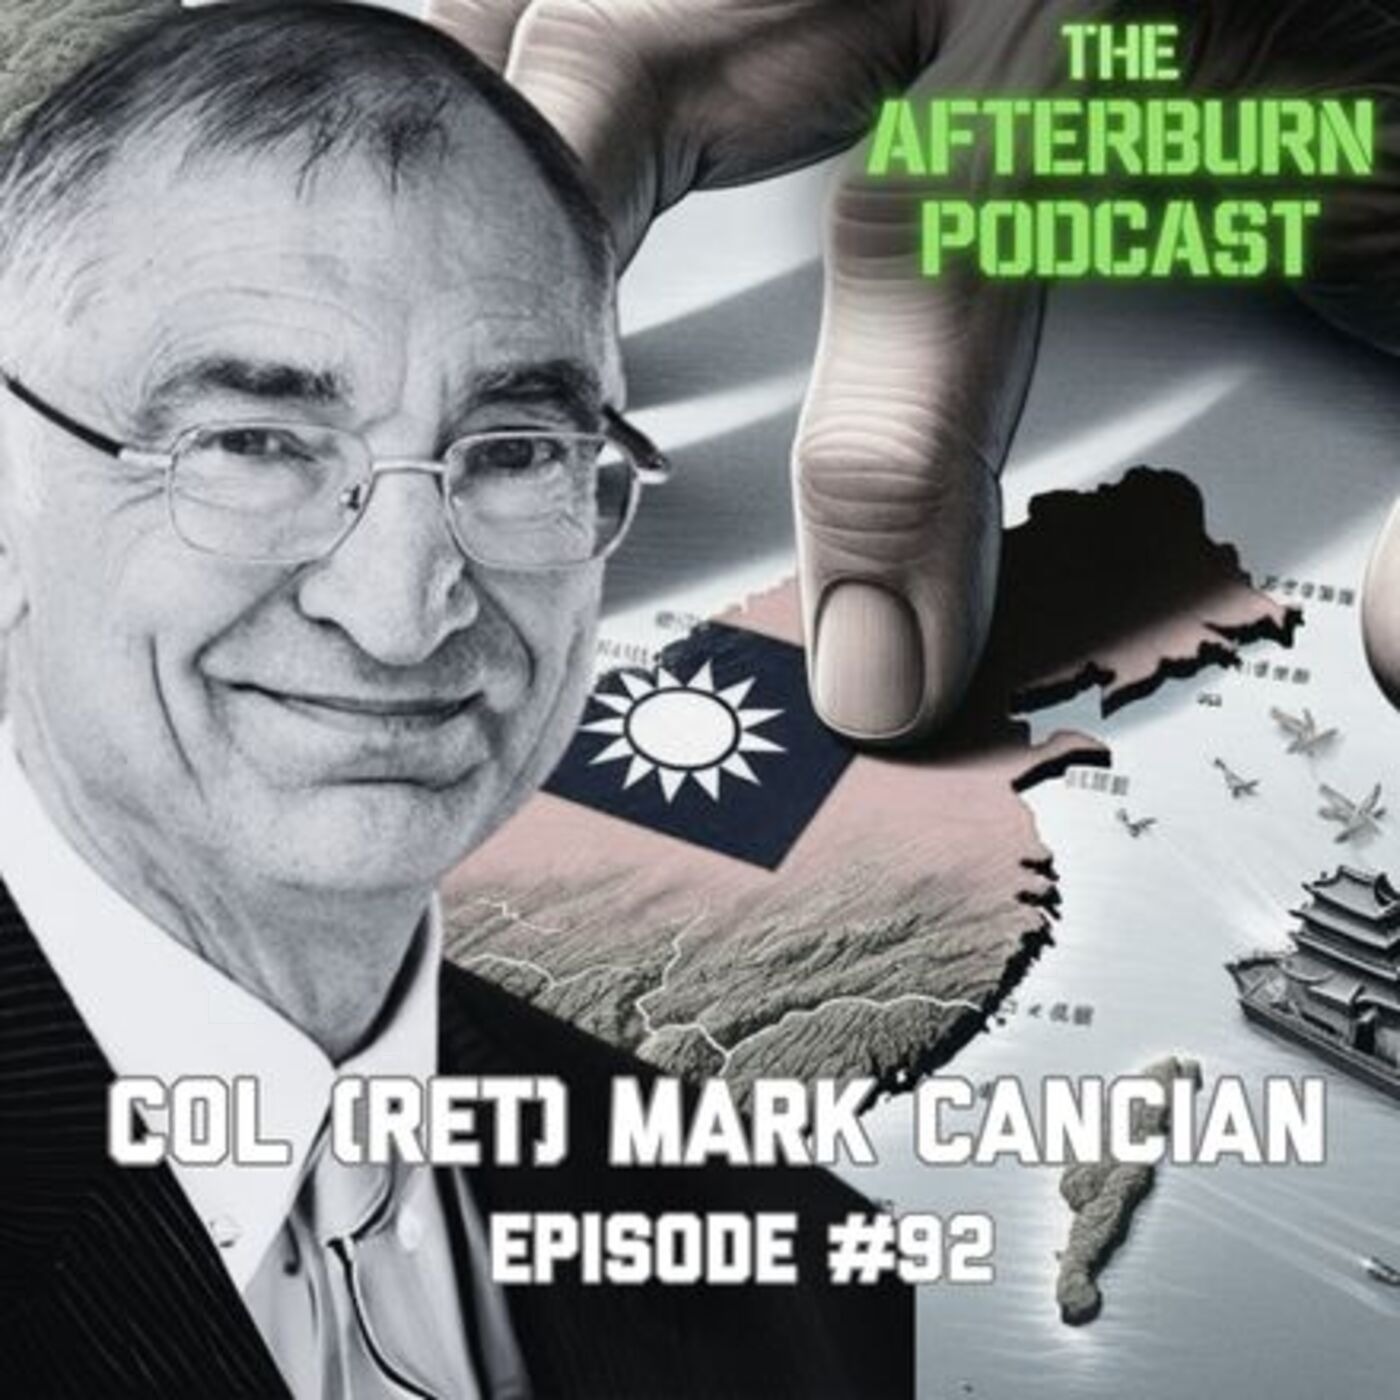 #92 - Chinese Invasion of Taiwan - What would it look like? Col (Ret) Mark Cancian